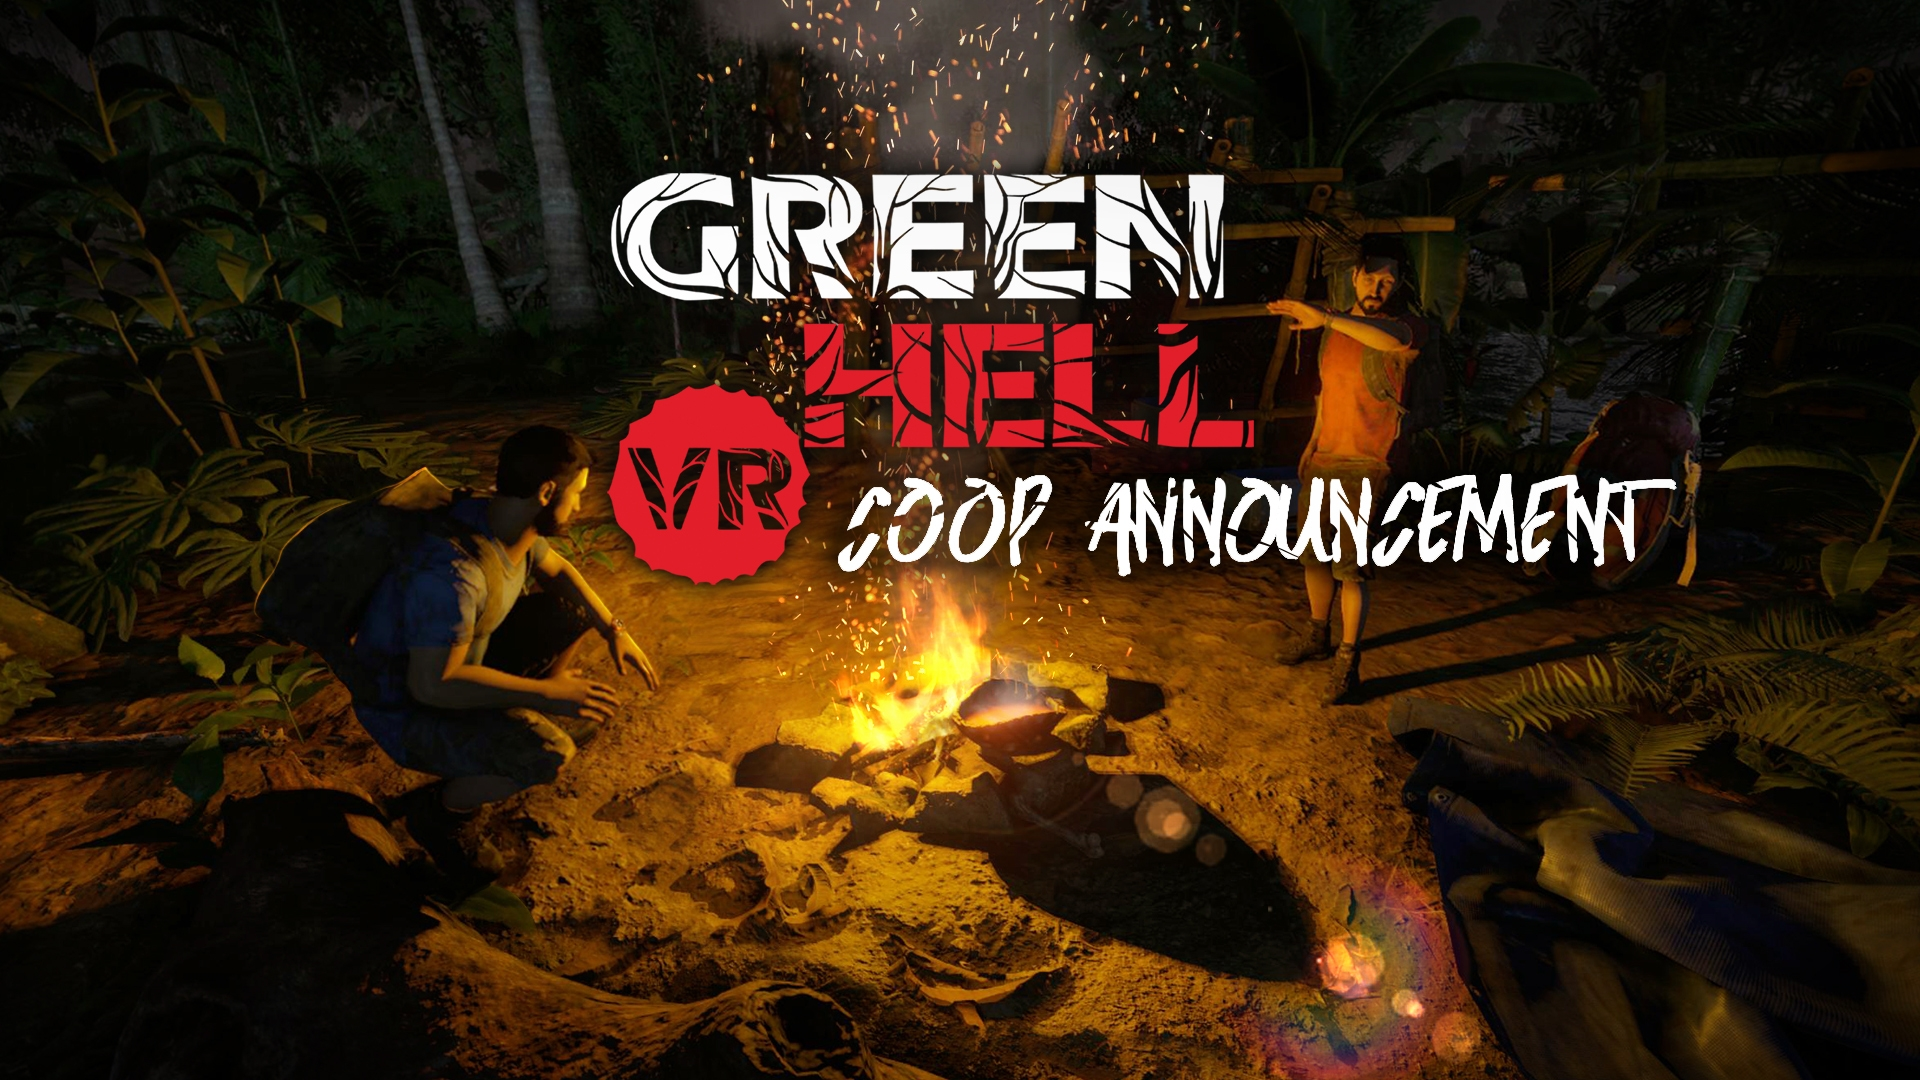 Open World Survival Game 'Green Hell VR' is Getting a Co-op Mode